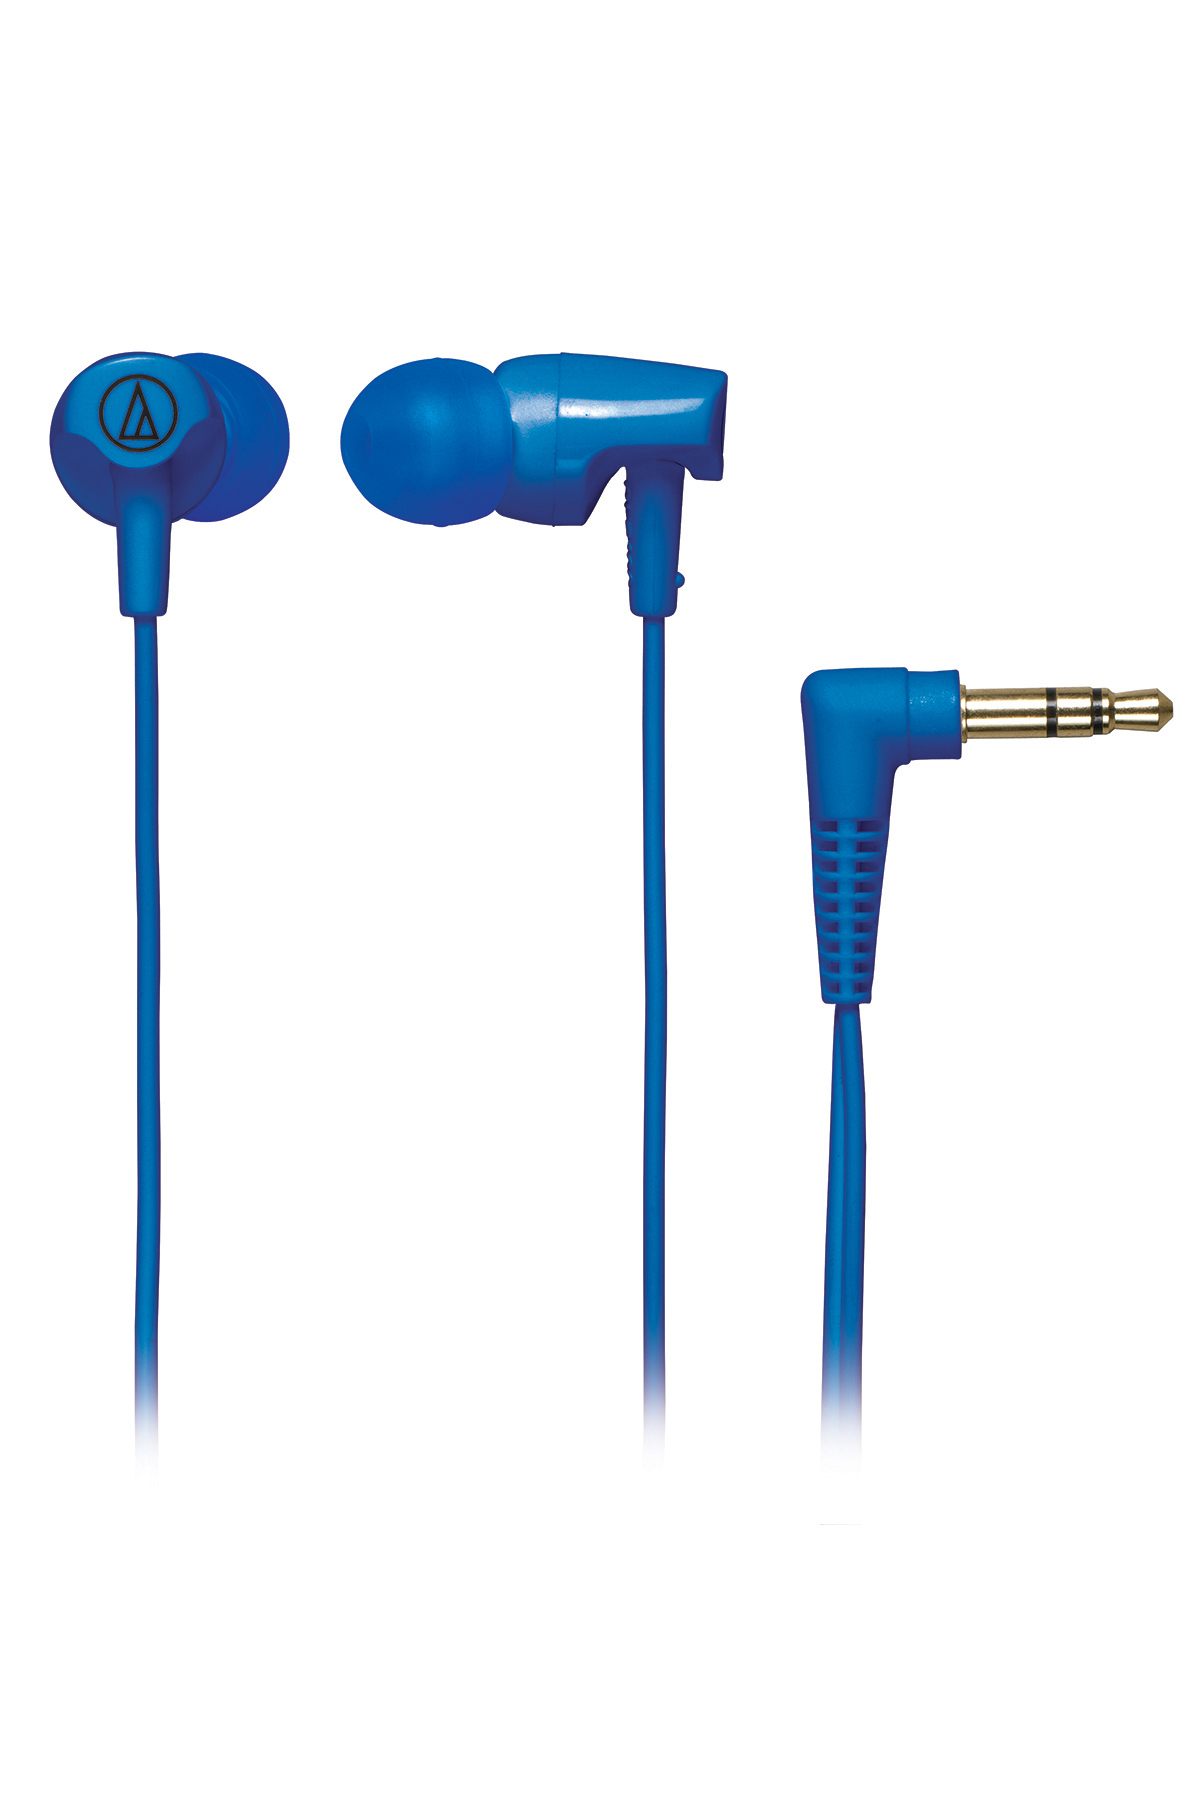 Audio-Technica Clear Earbuds Blue, ATH-CLR100 - image 2 of 2